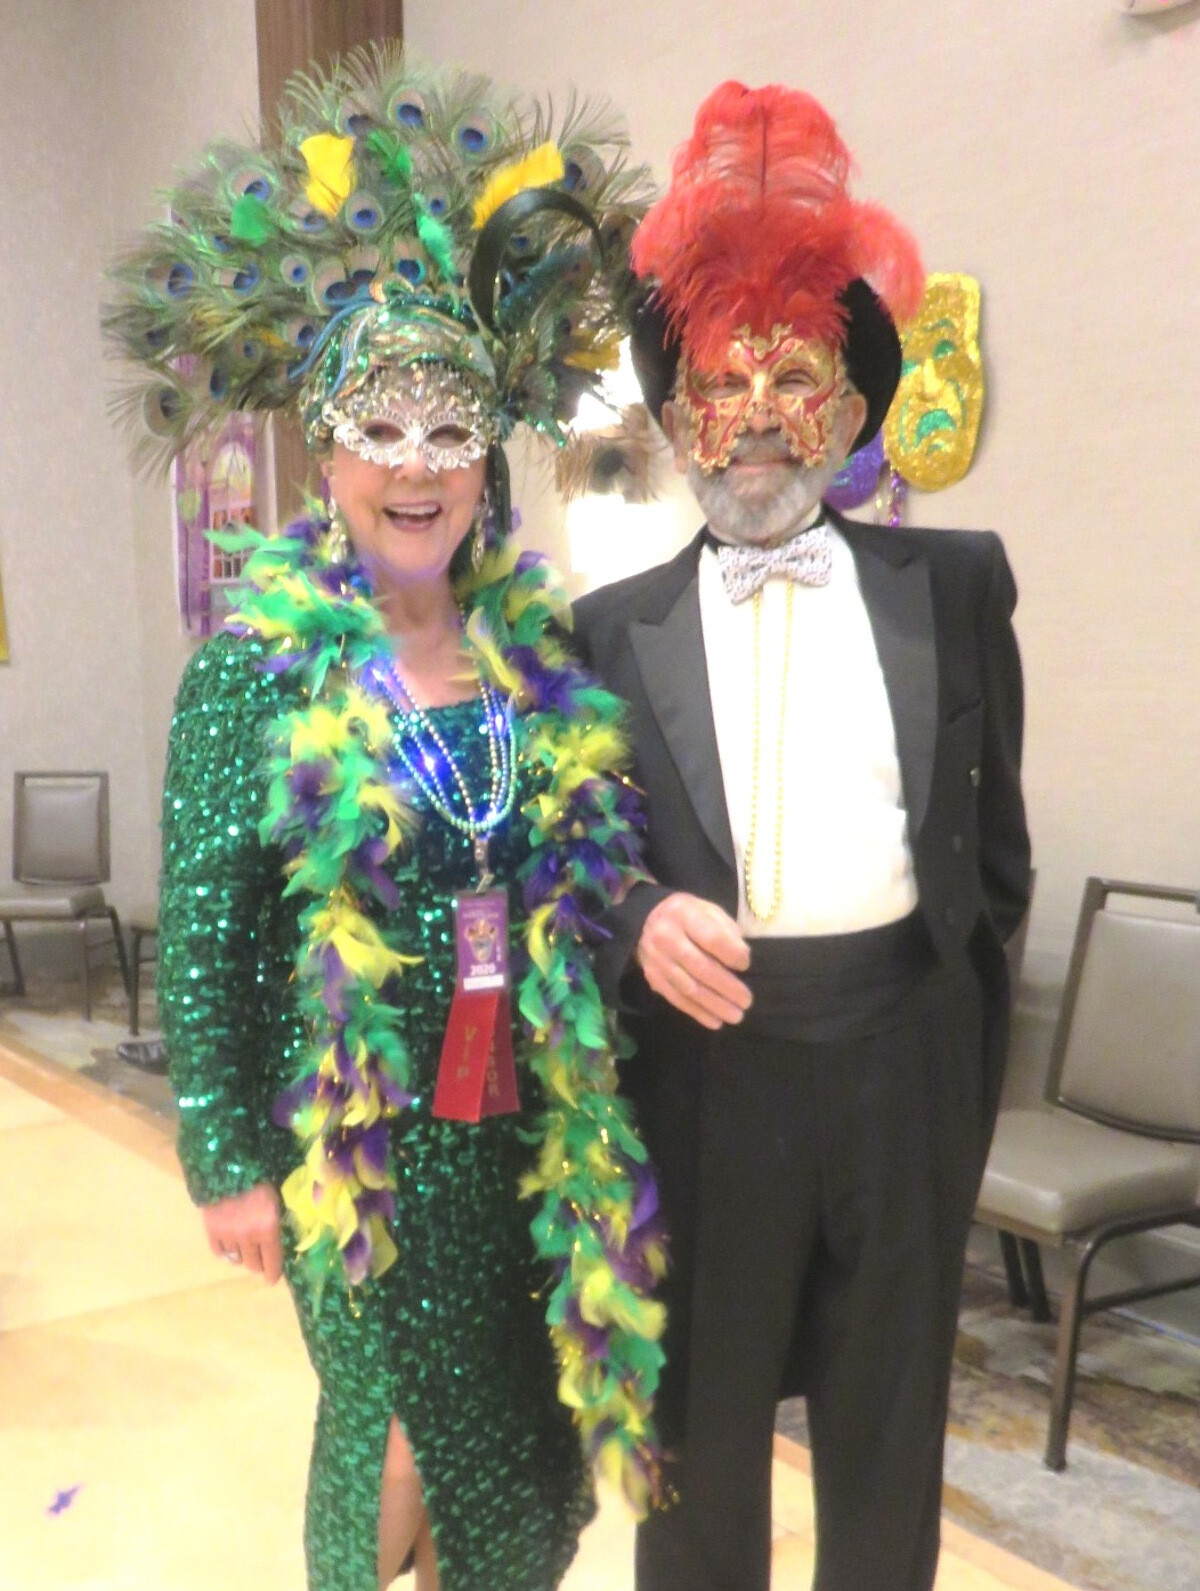 From the 2020 Fresno Sounds of Mardi Gras The Syncopated Times